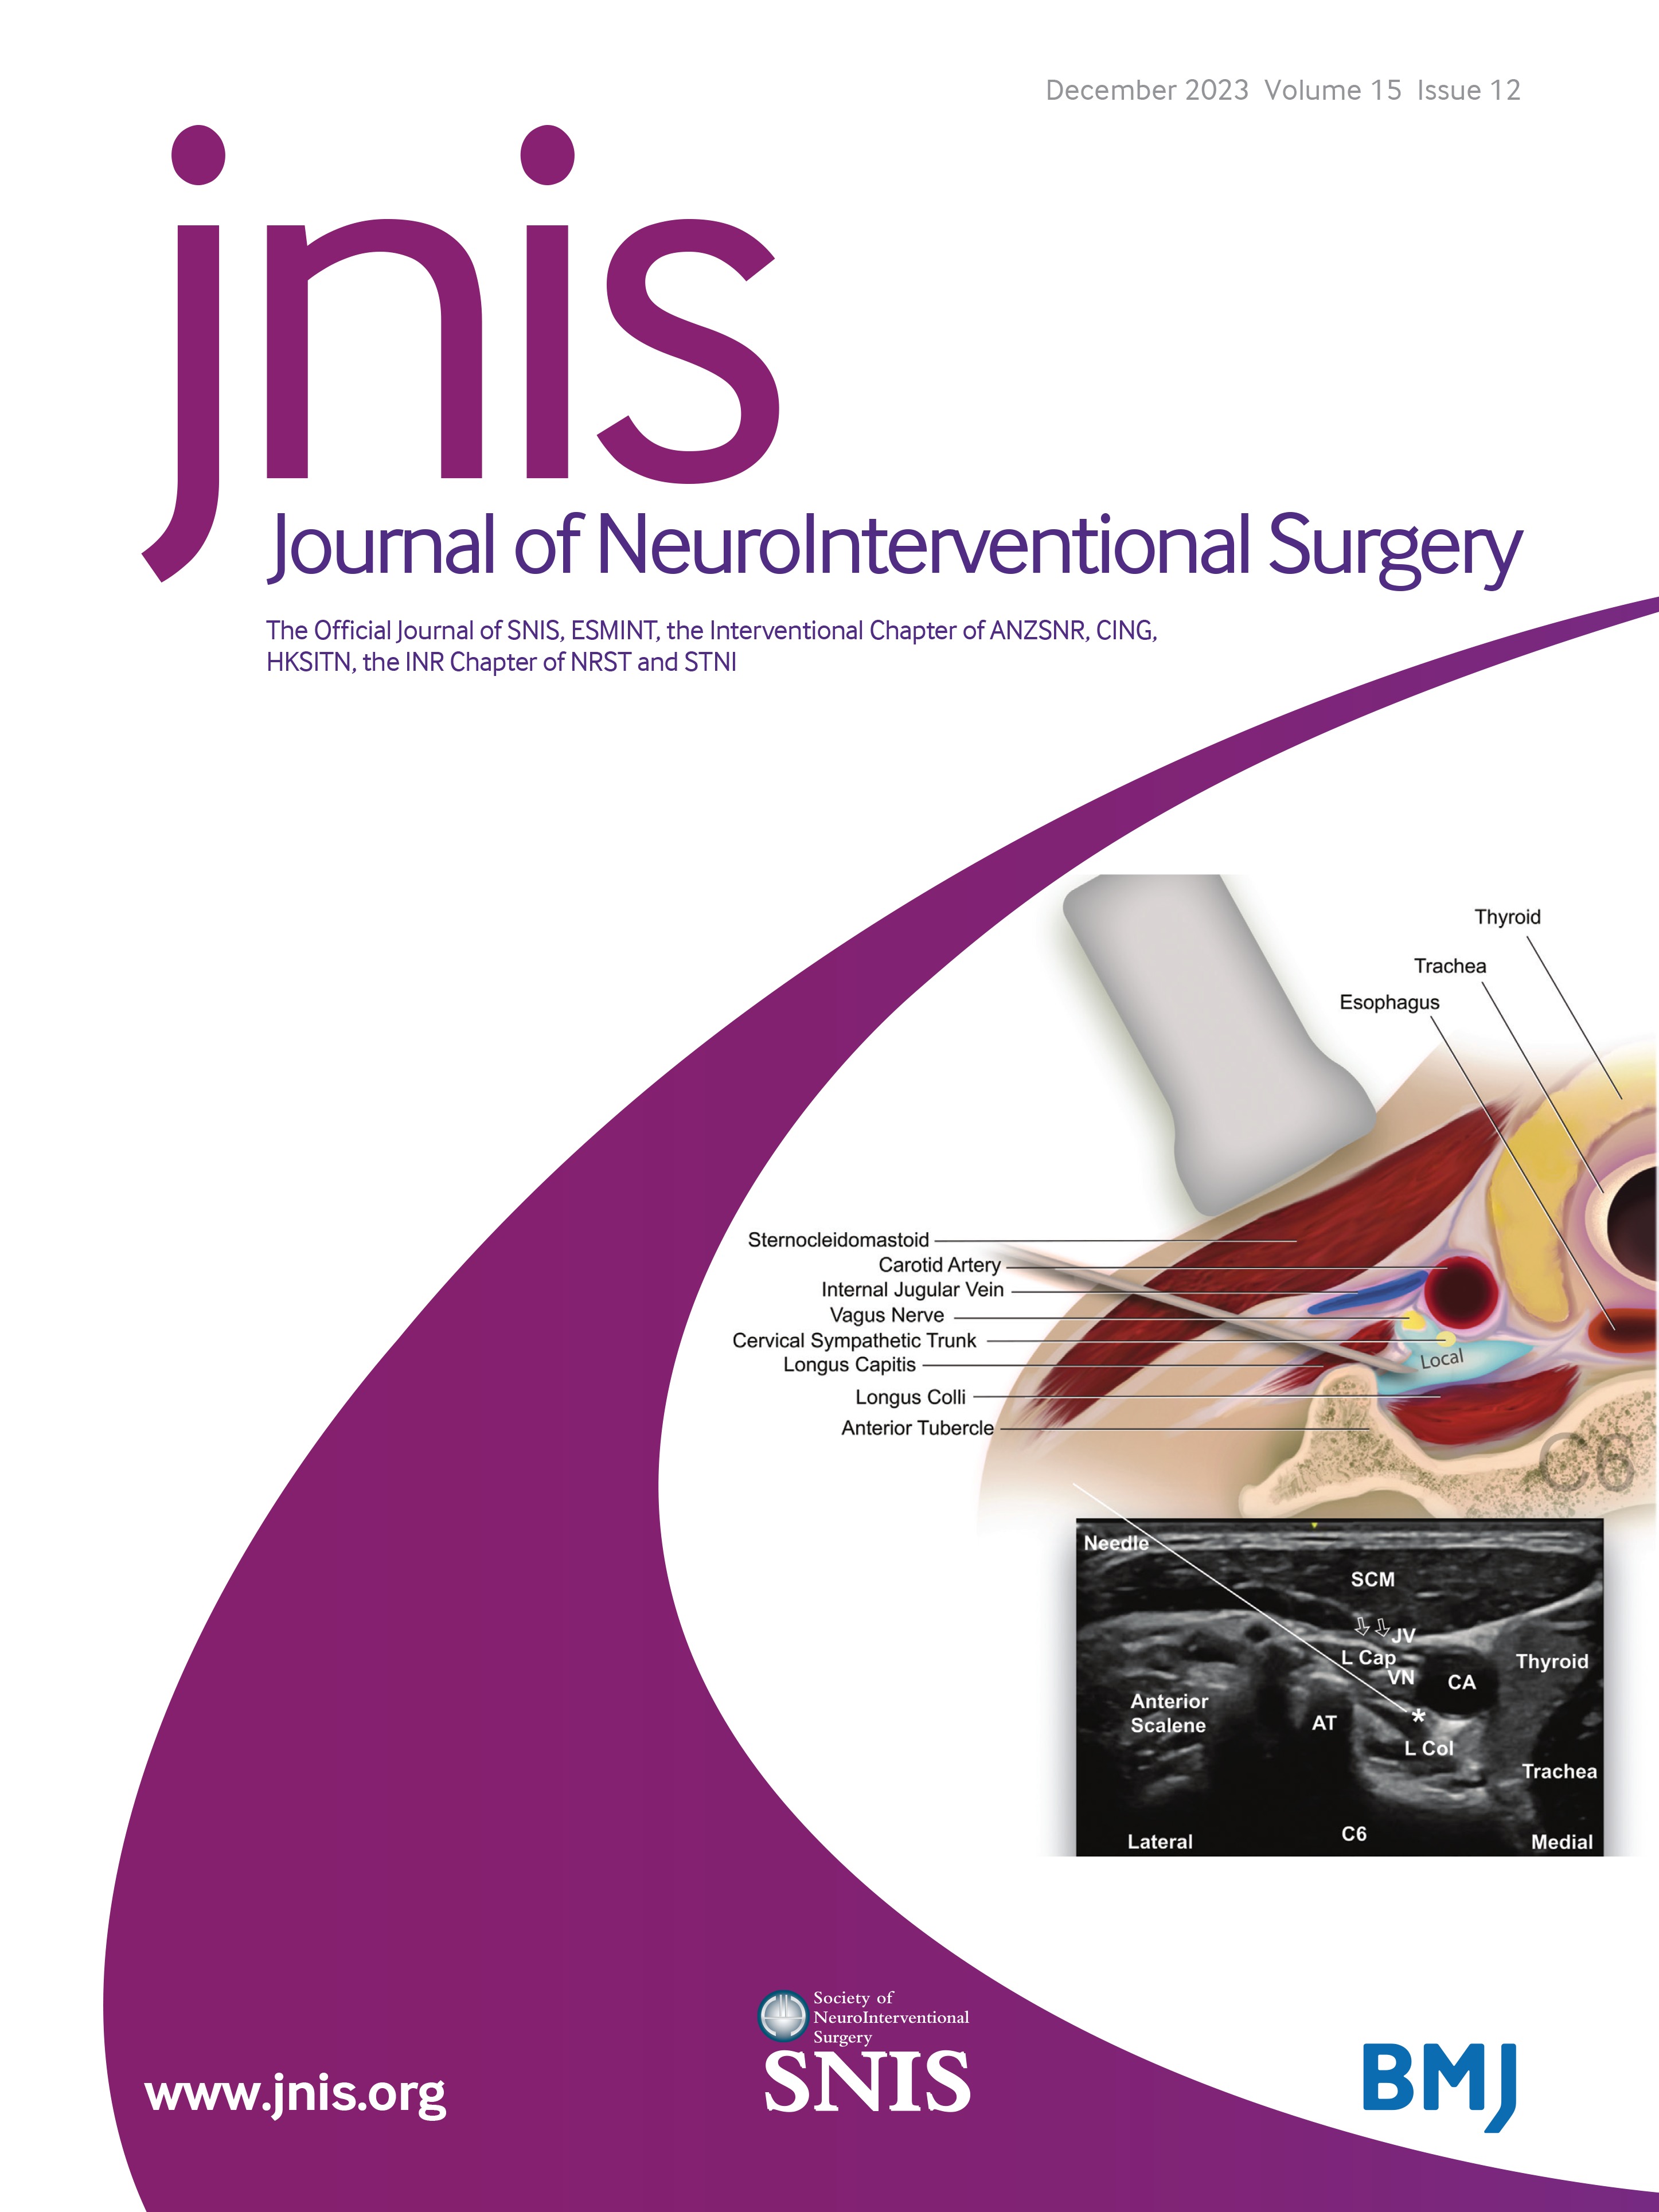 Gender disparities in industry compensation and research payments among neurointerventional surgeons in the USA